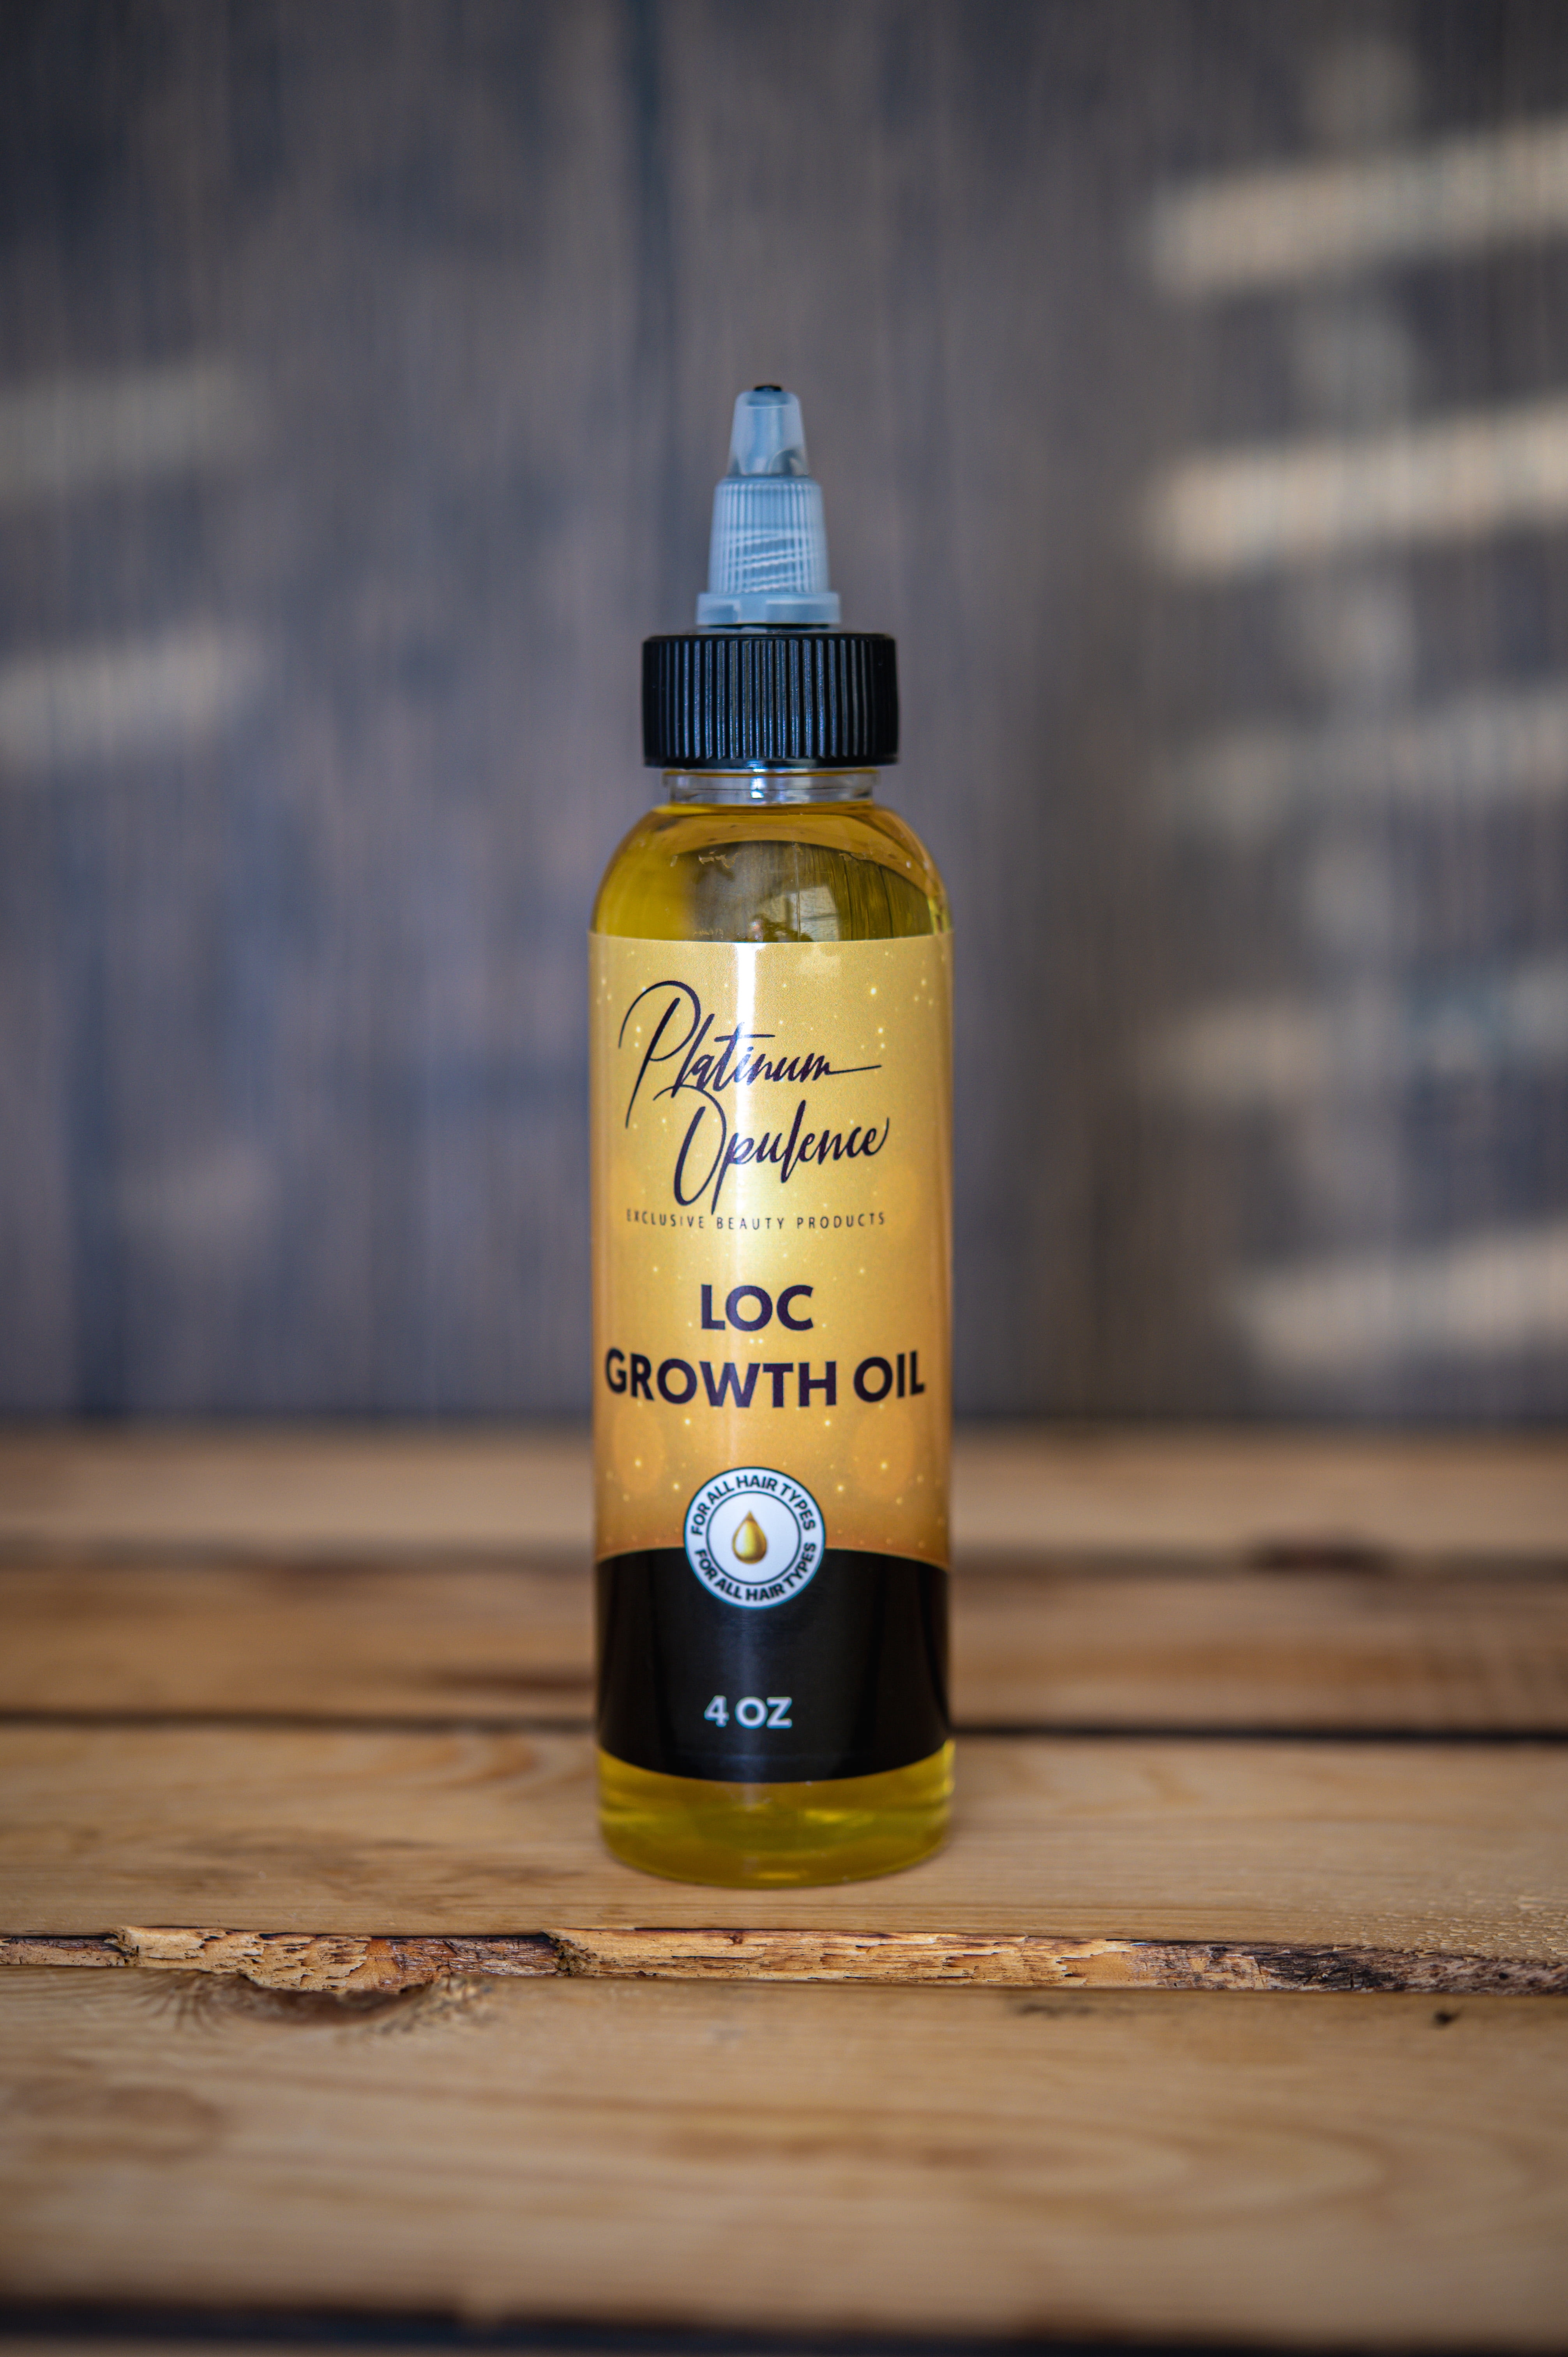 Platinum Opulence Loc Growth Oil | Light Styling Oil for Locs, Braids,  Natural, and Relaxed Hair 